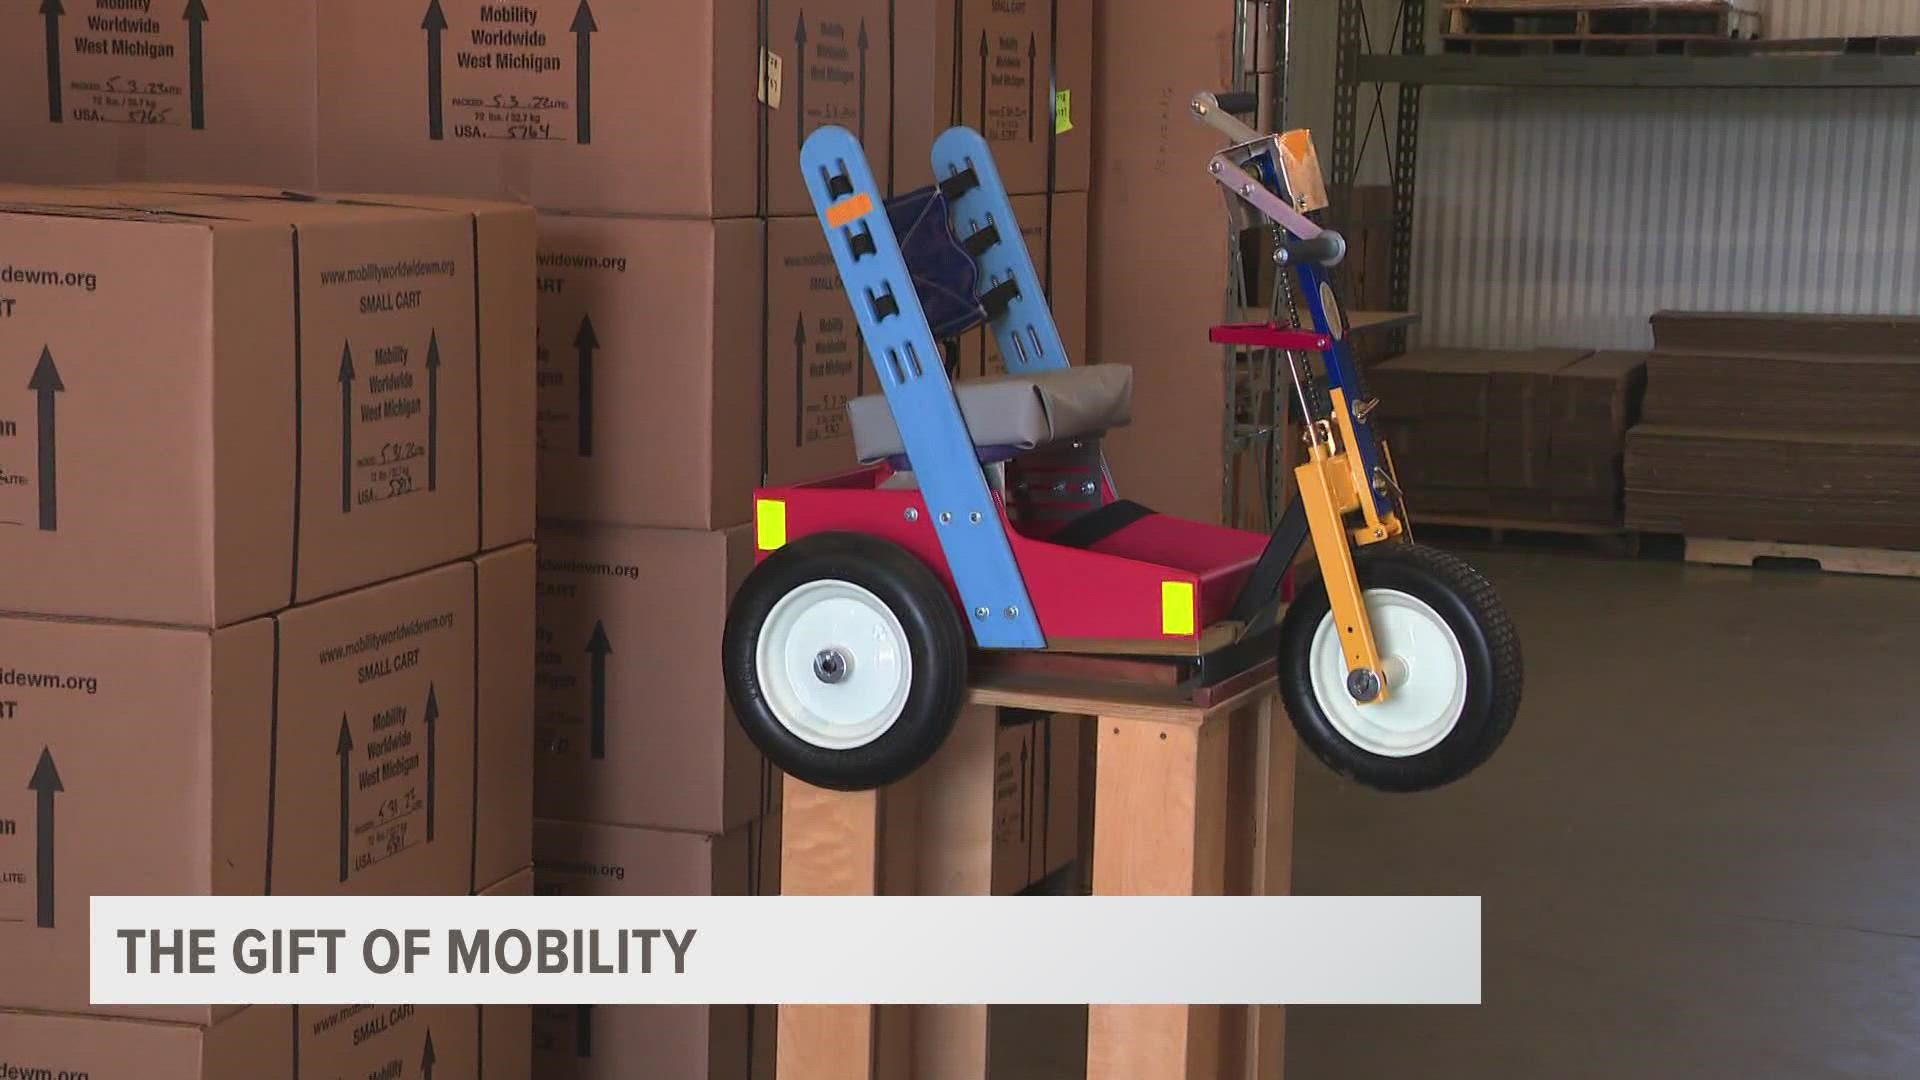 Mobility Worldwide West Michigan is run entirely by volunteers. They send 750 mobility carts to developing countries every year.